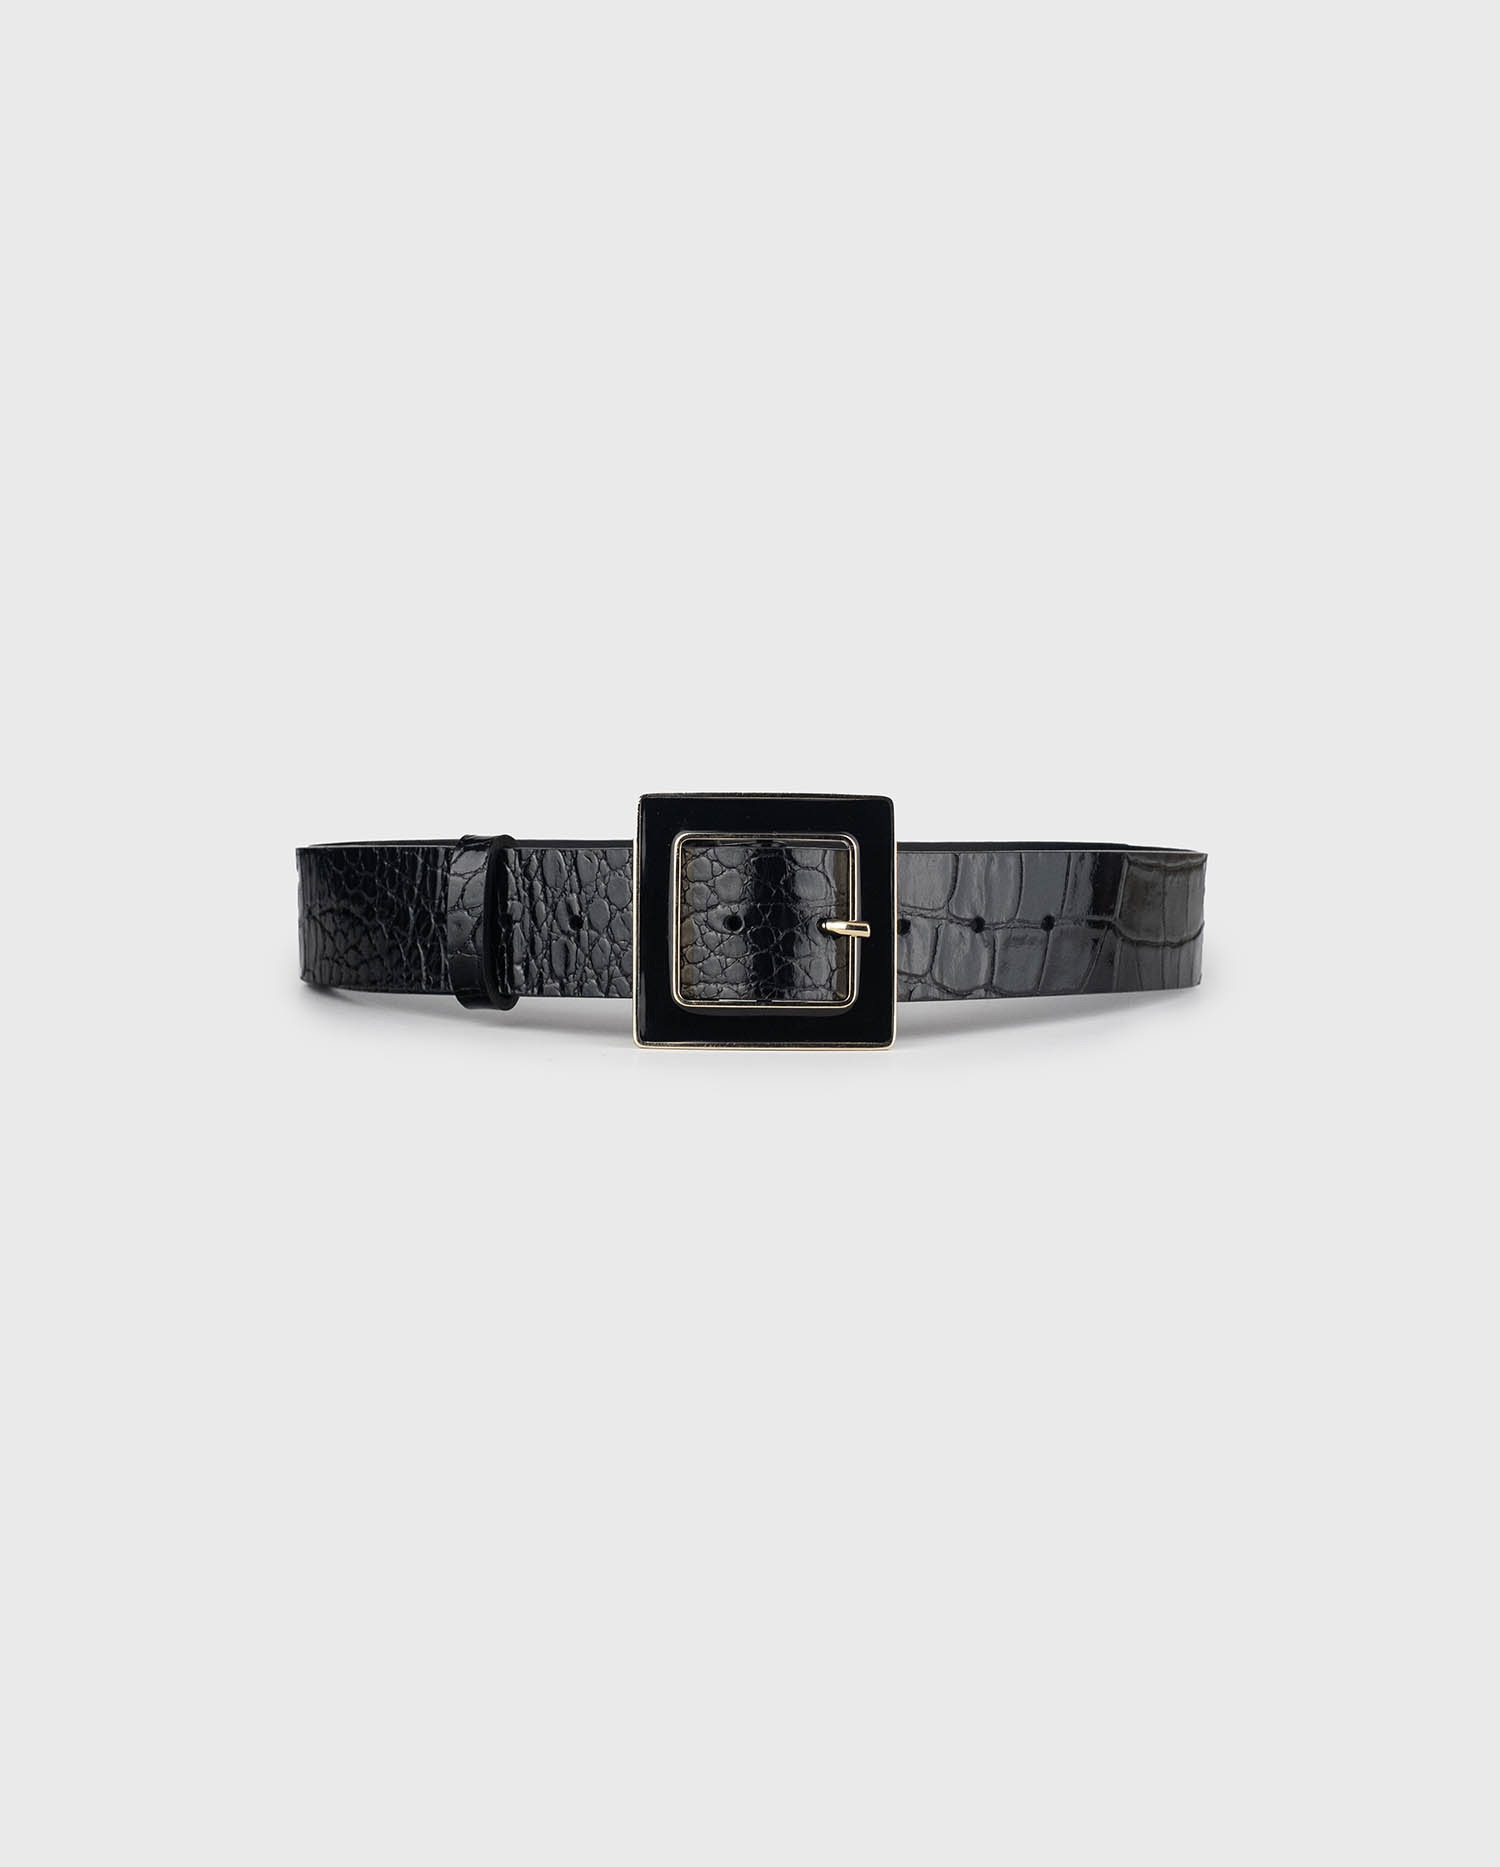 Disocver The NORTH-MM Croc-embossed leather belt in a glossy black from ANNE FONTAINE